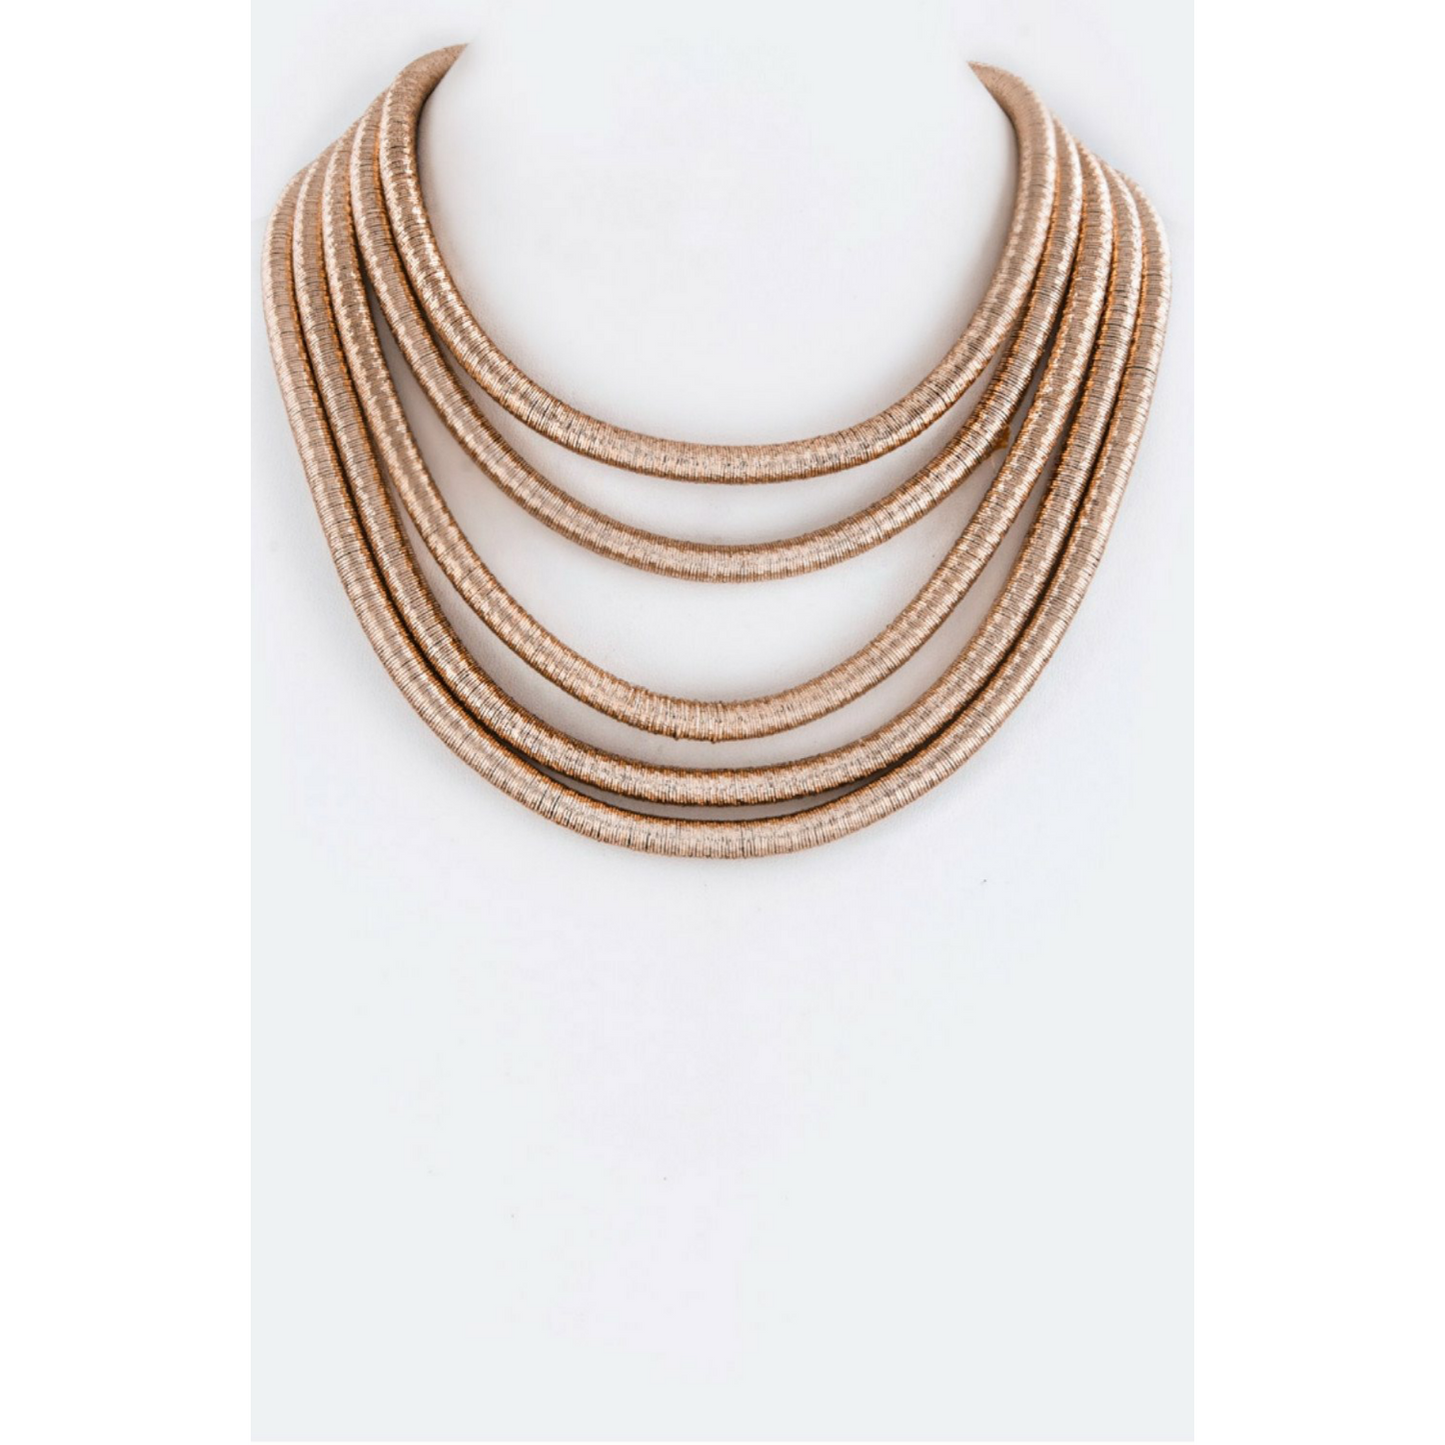 Luxe Ropes Statement Necklace (3 Options)